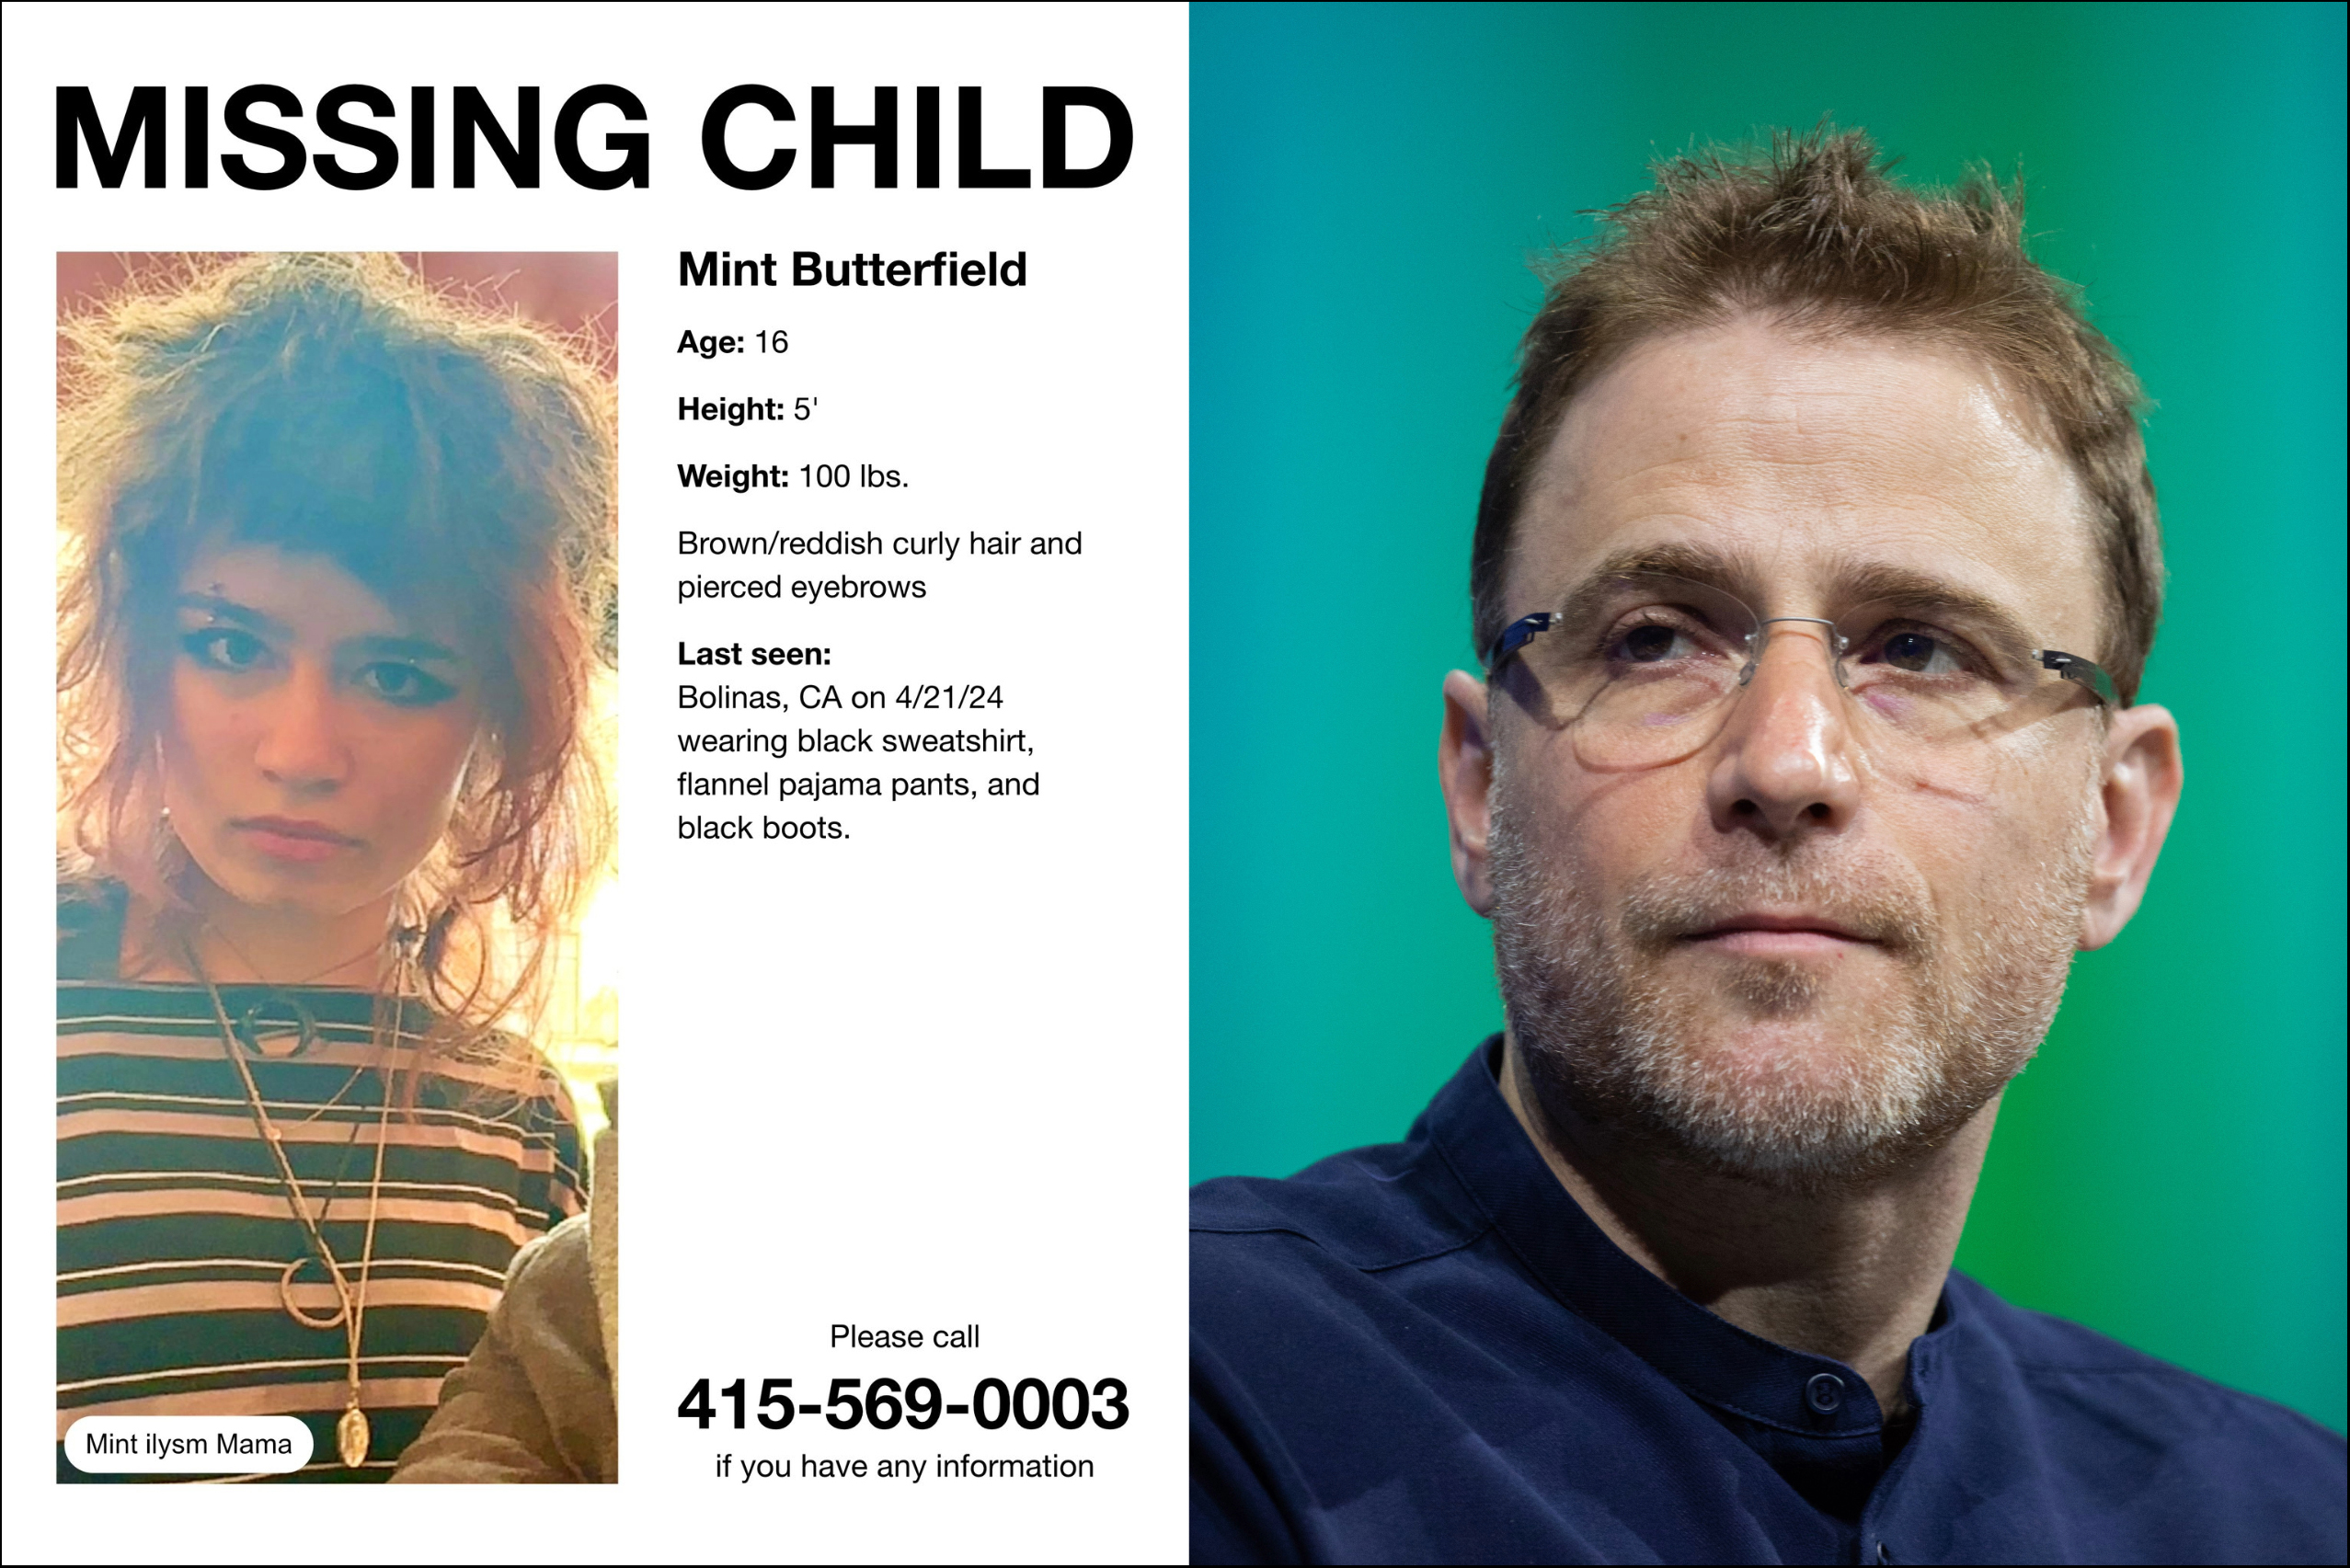 A missing child poster with details and a photo next to a man with glasses against a green background.